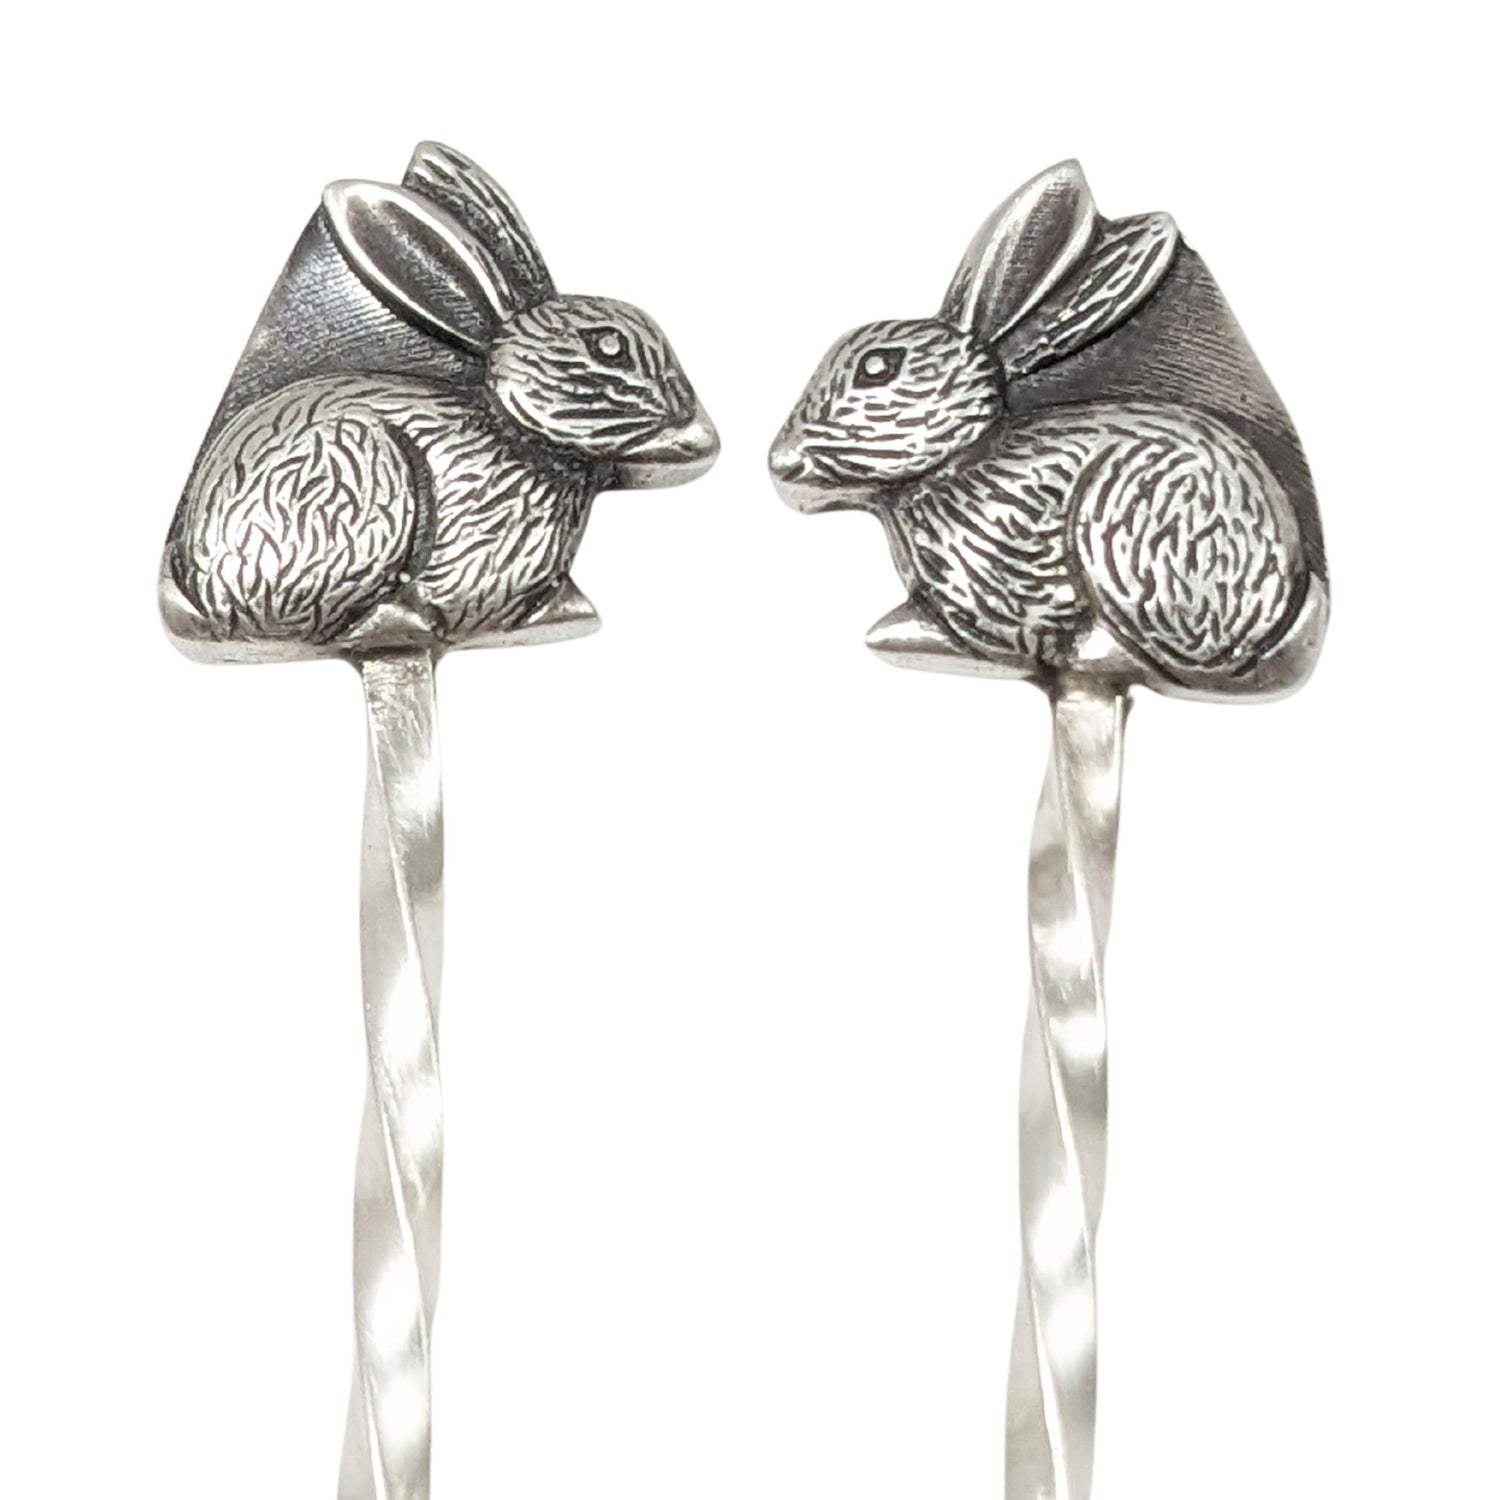 Sterling silver cocktail picks with silver rabbits on top. One rabbit faces left, the other faces right.